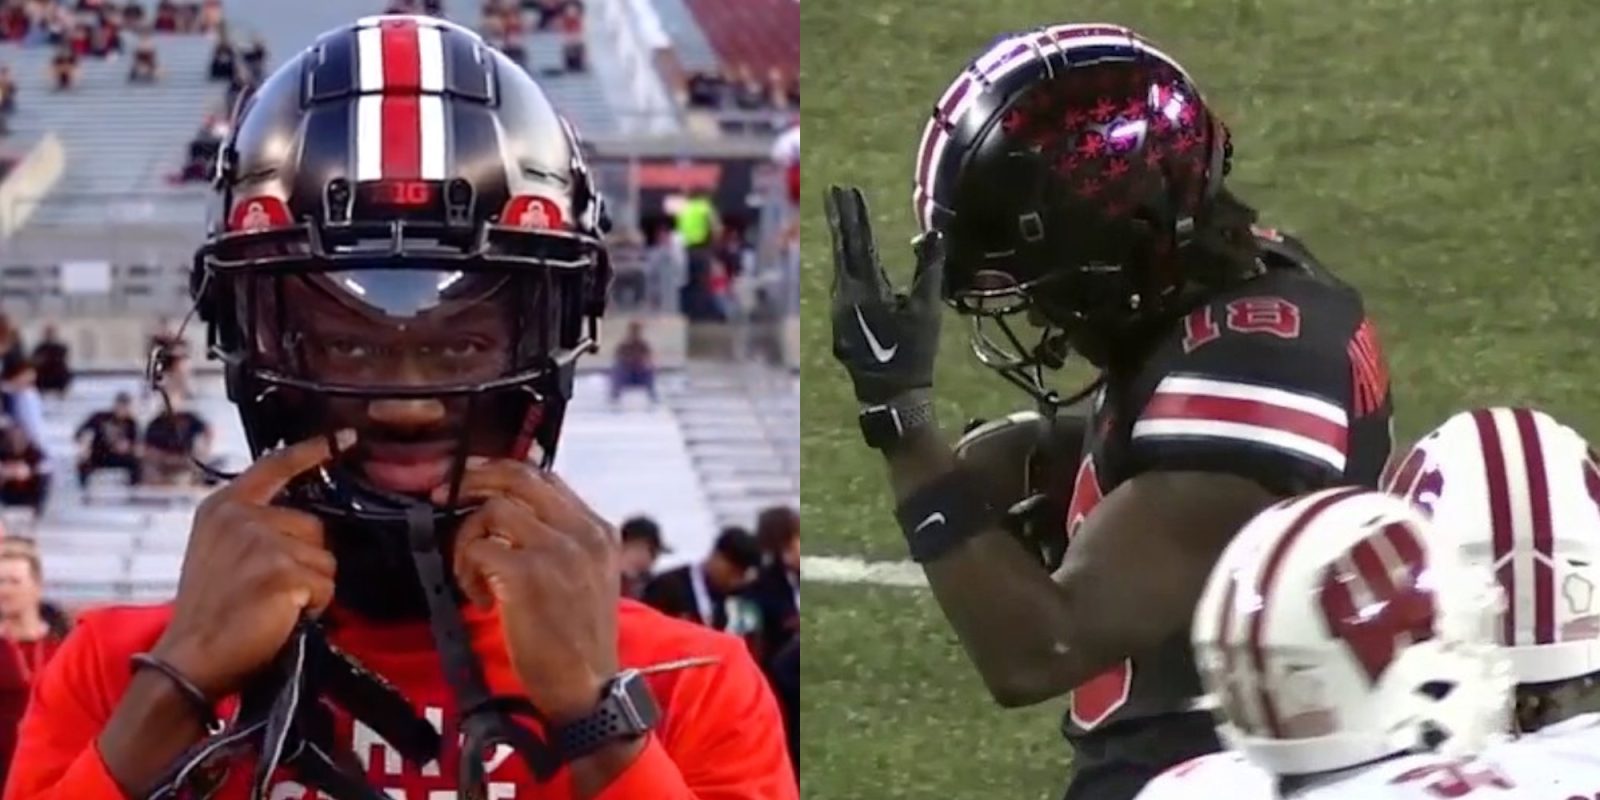 Ohio State football player caught sporting Apple Watch (and Louis Vuitton cleats) during game